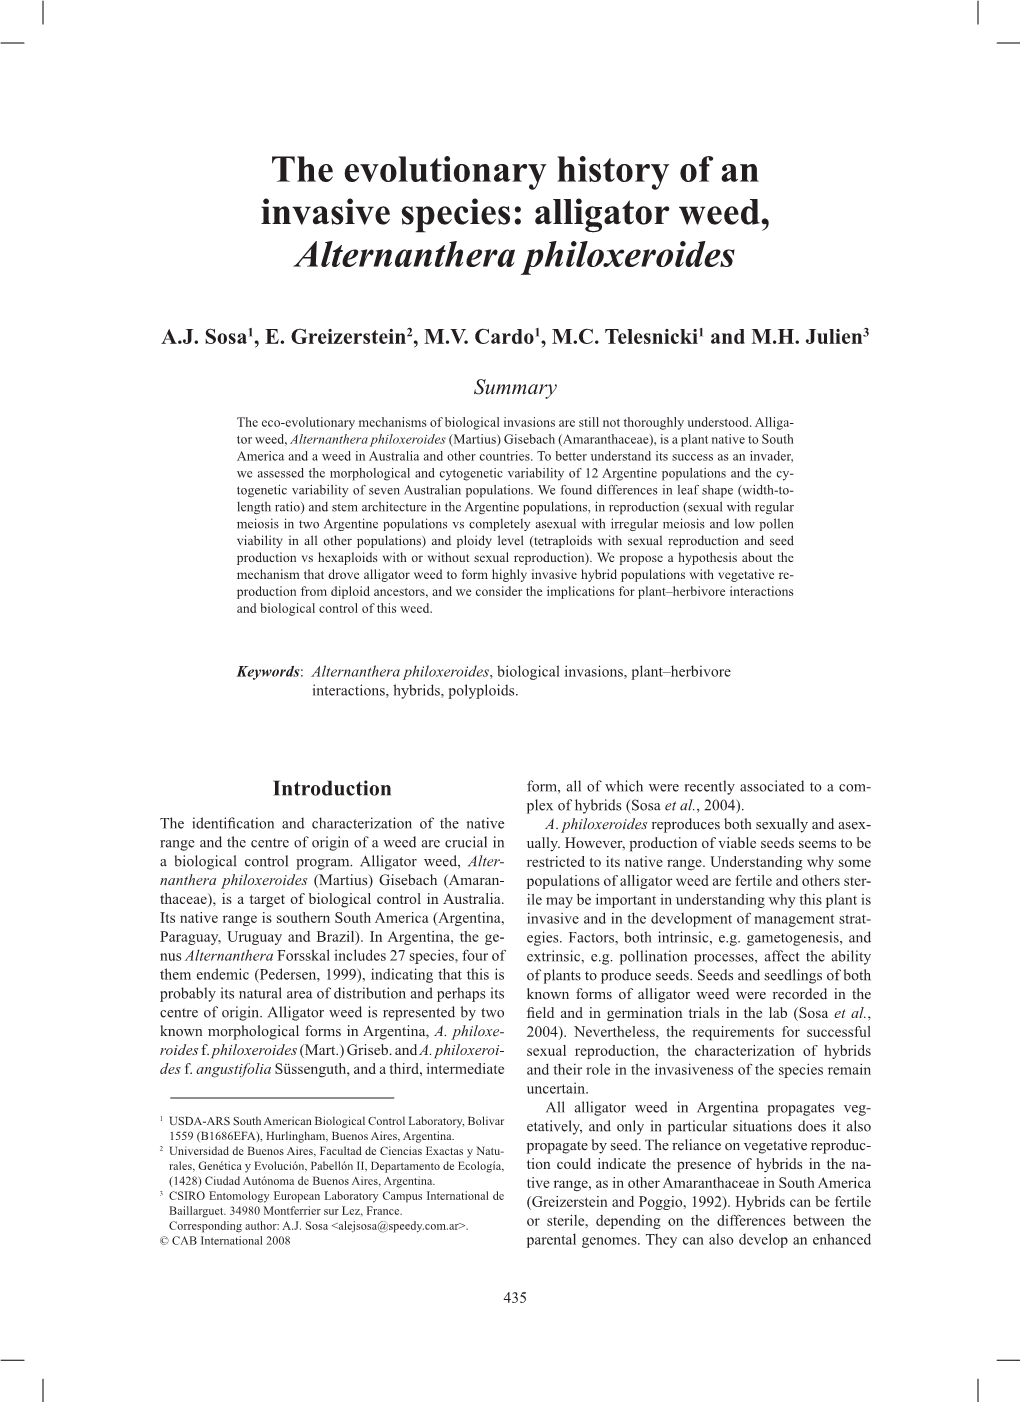 The Evolutionary History of an Invasive Species: Alligator Weed, Alternanthera Philoxeroides